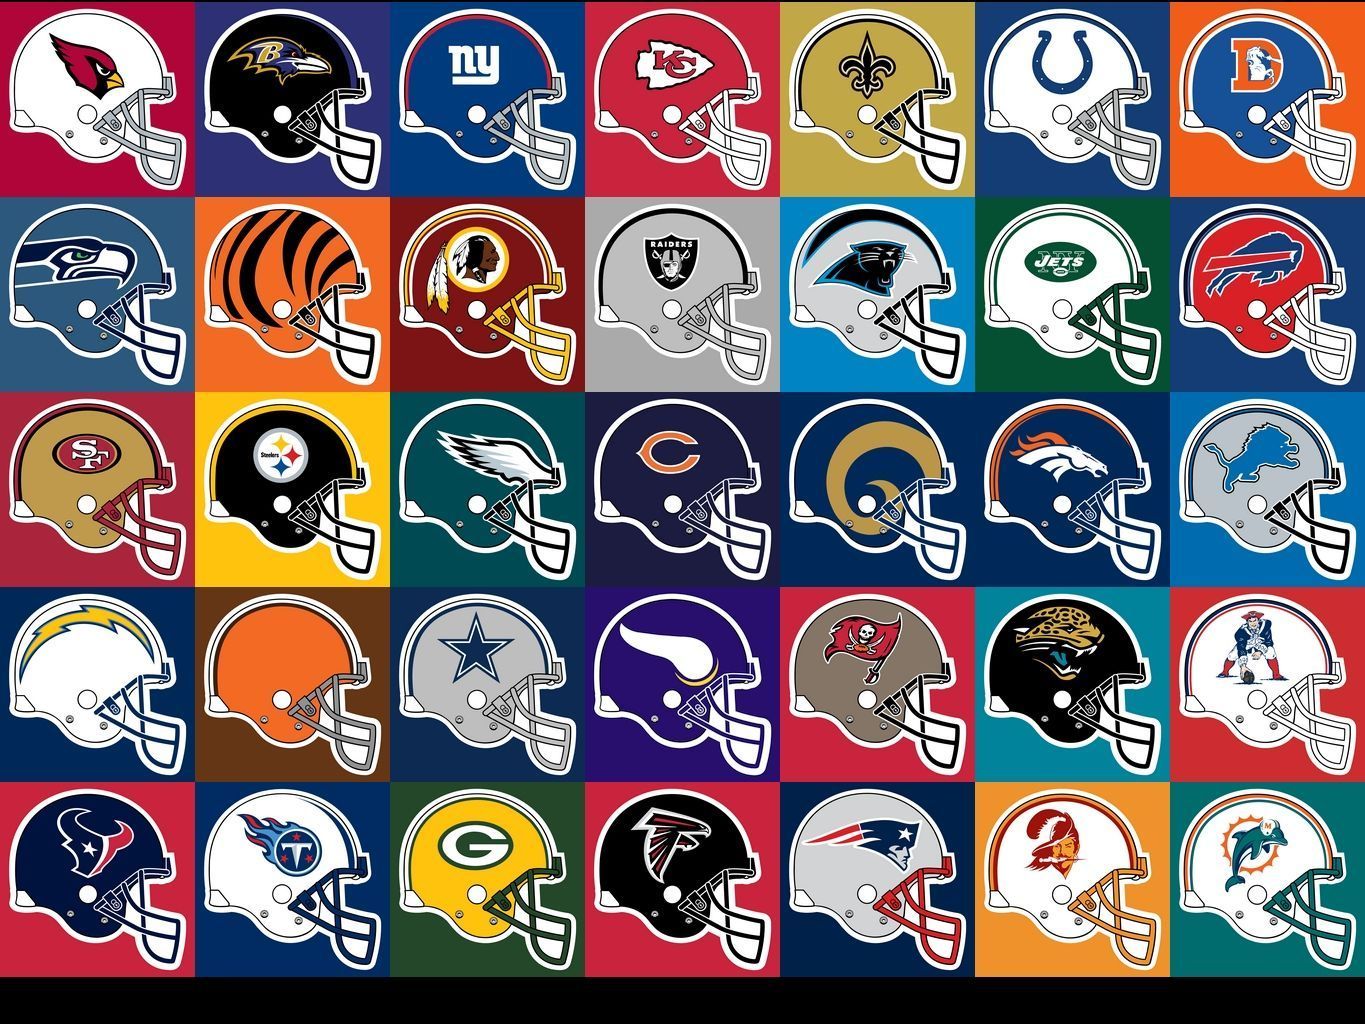 NFL Wallpapers | HD Wallpapers Early